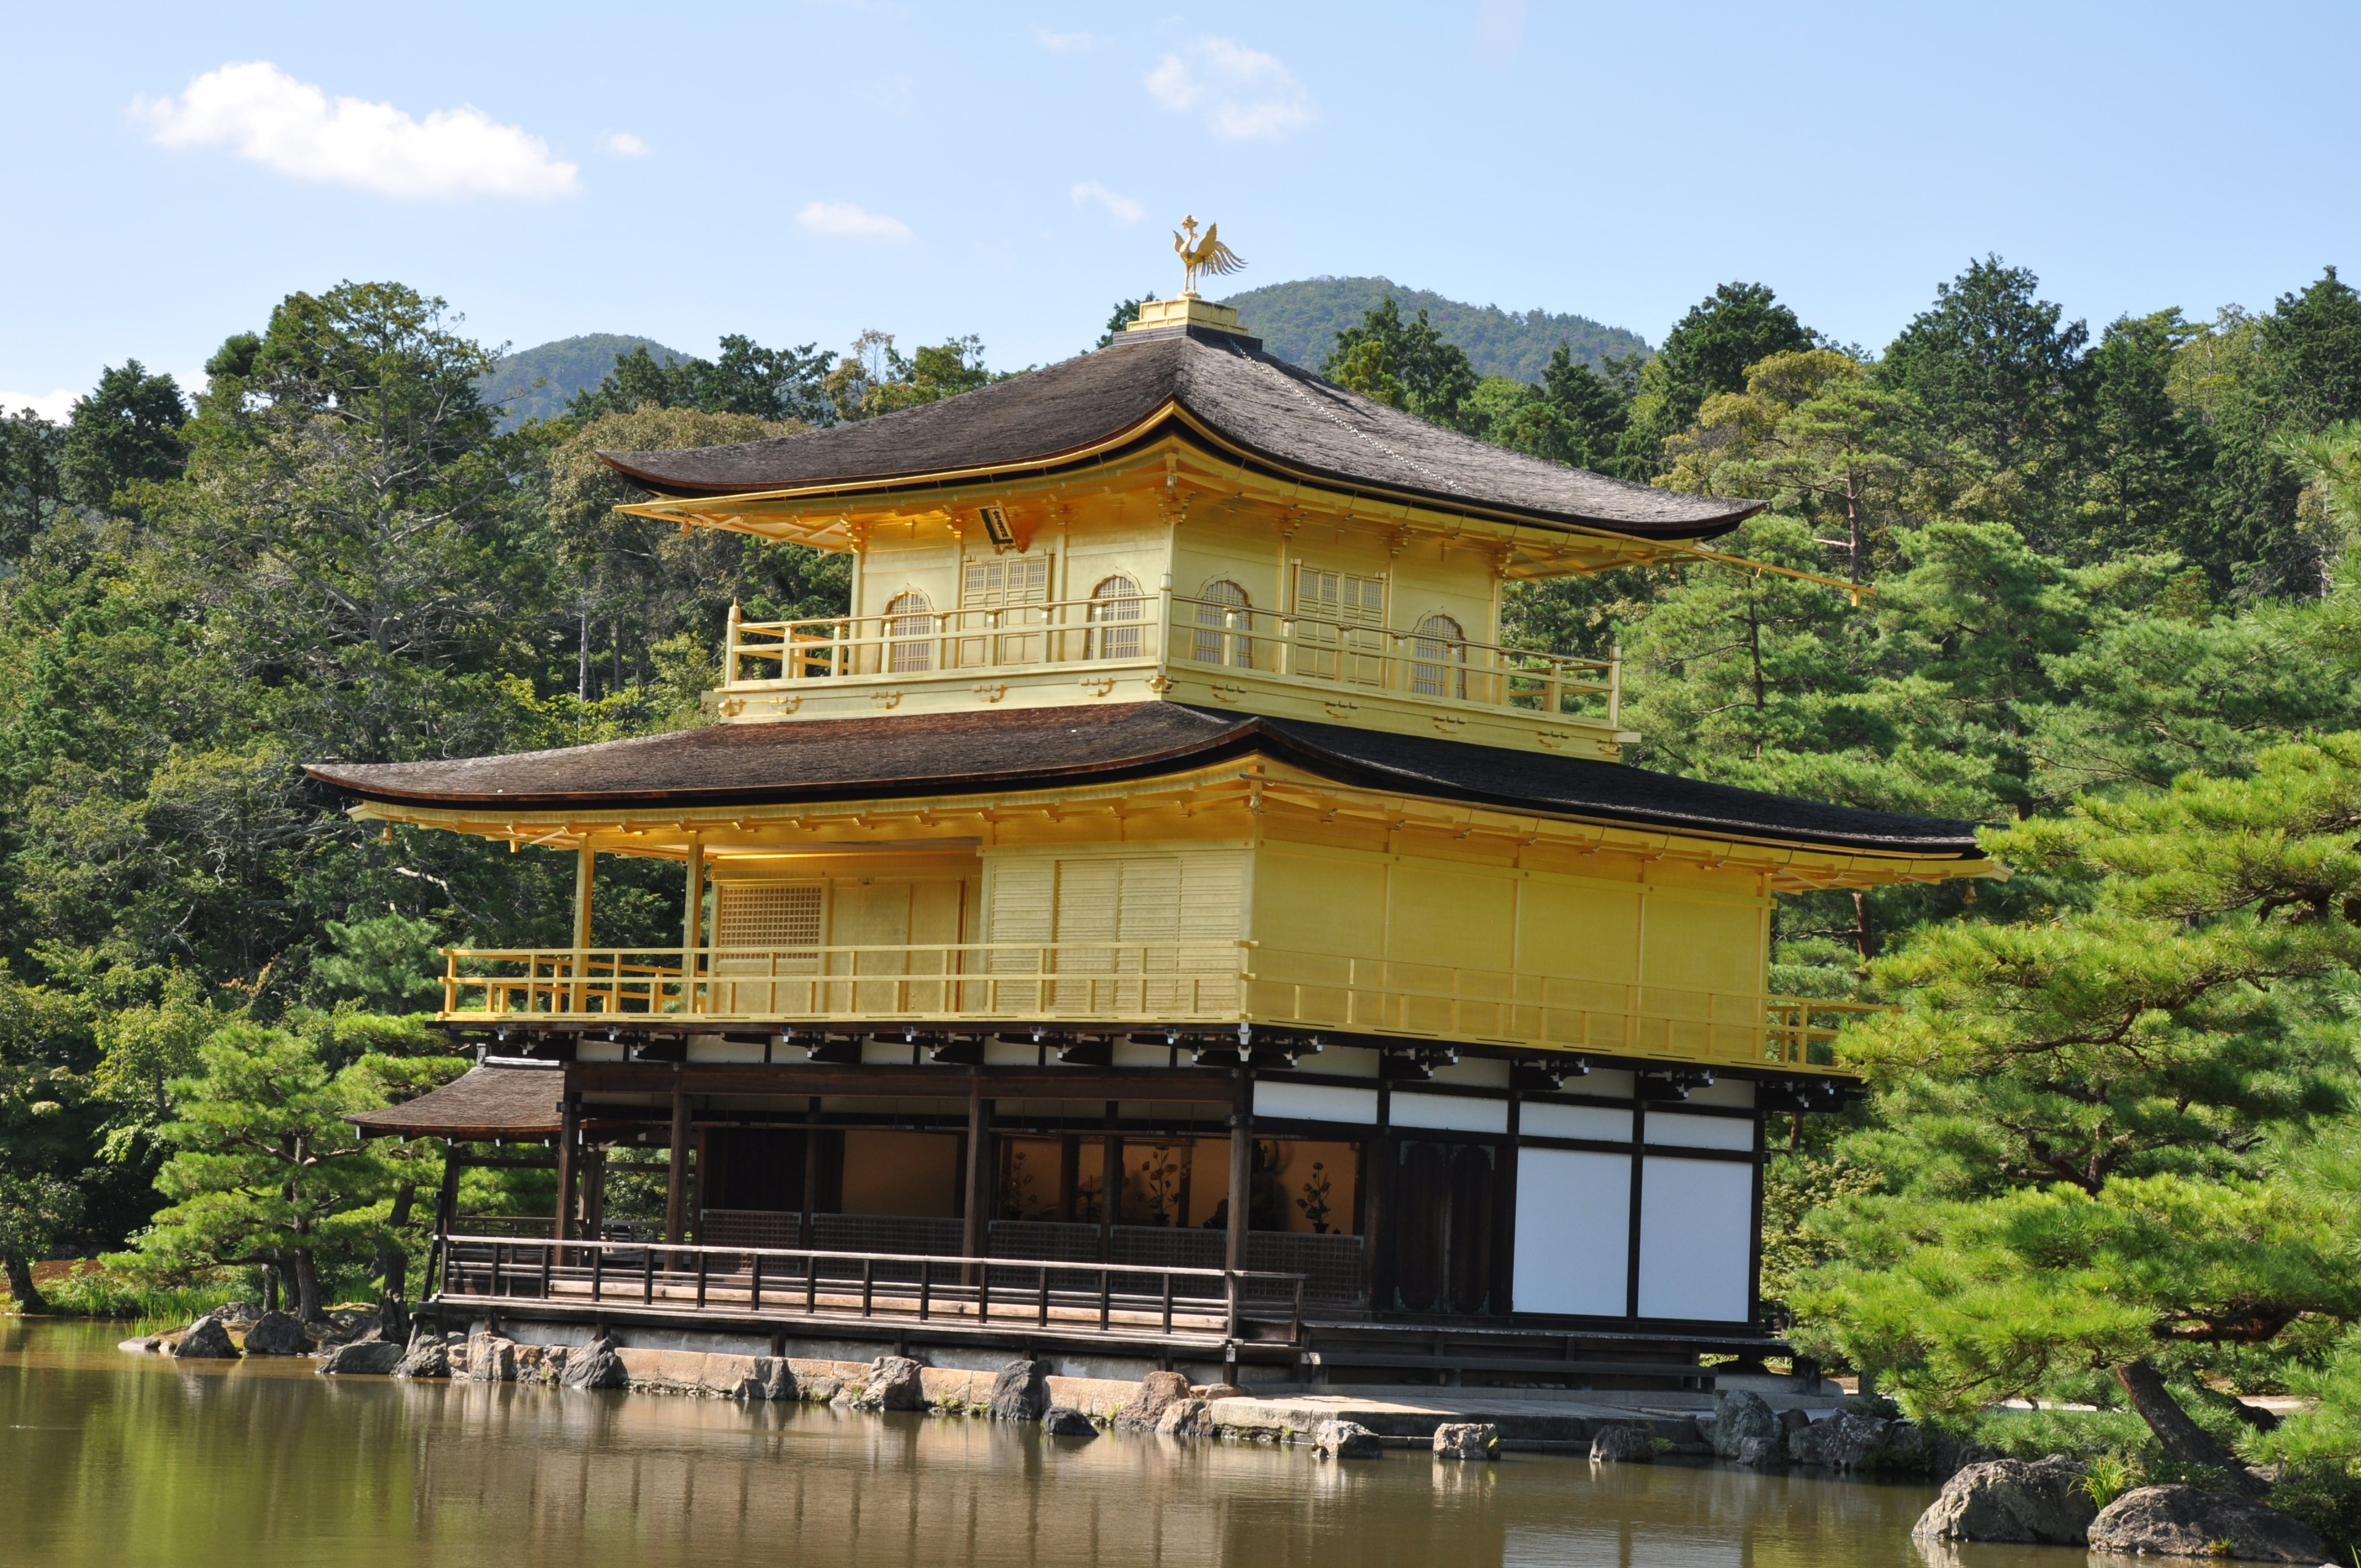 Built in the 14th century for a shogun, then rebuilt twice, this temple is now a Buddhist site and its top two floors are completely covered in gold leaf.